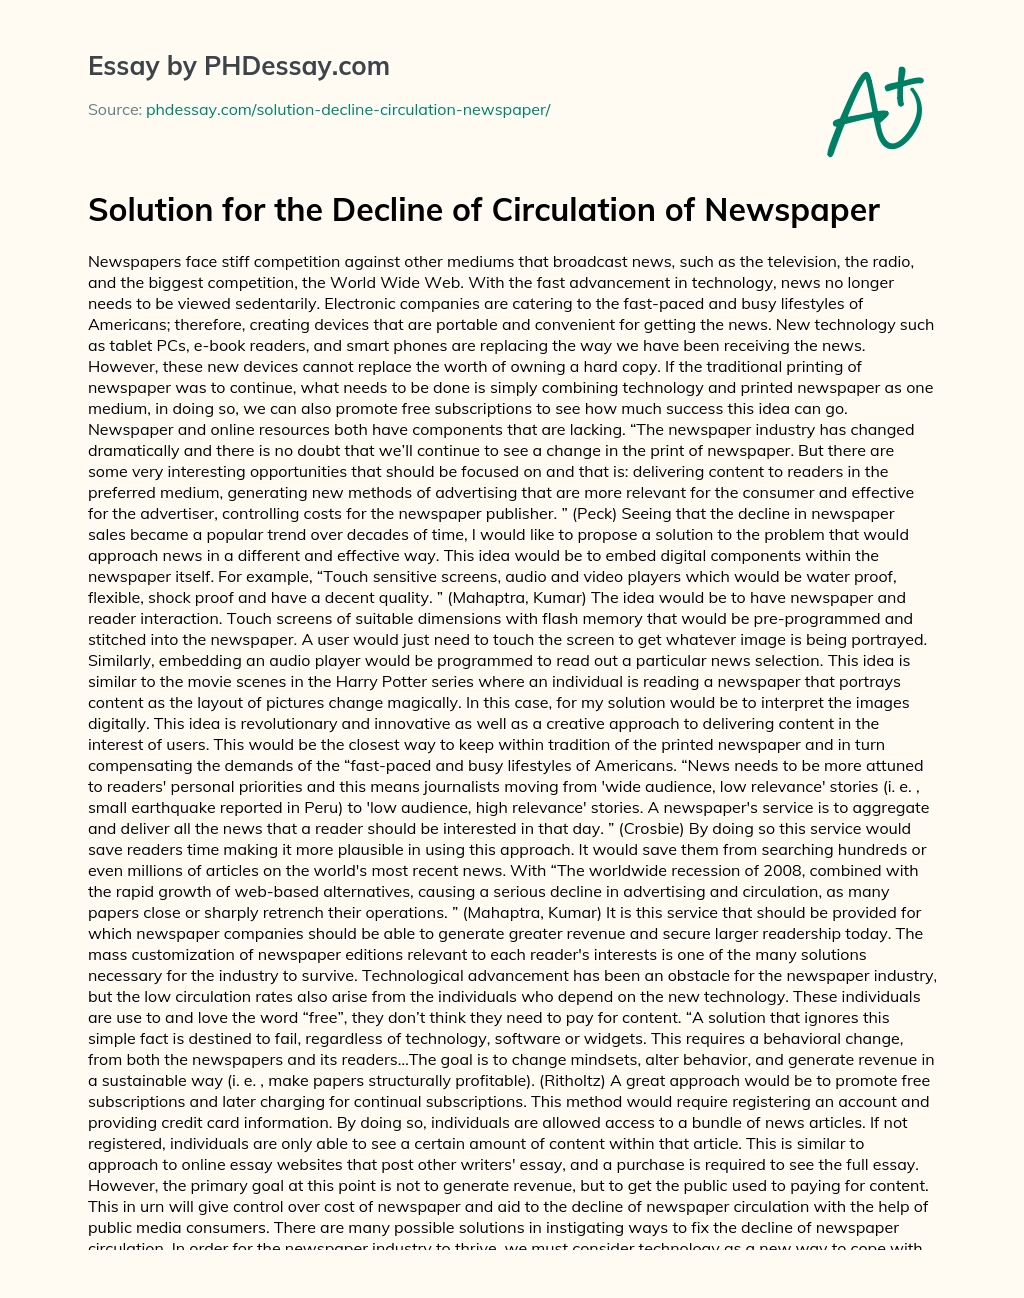 Solution for the Decline of Circulation of Newspaper essay